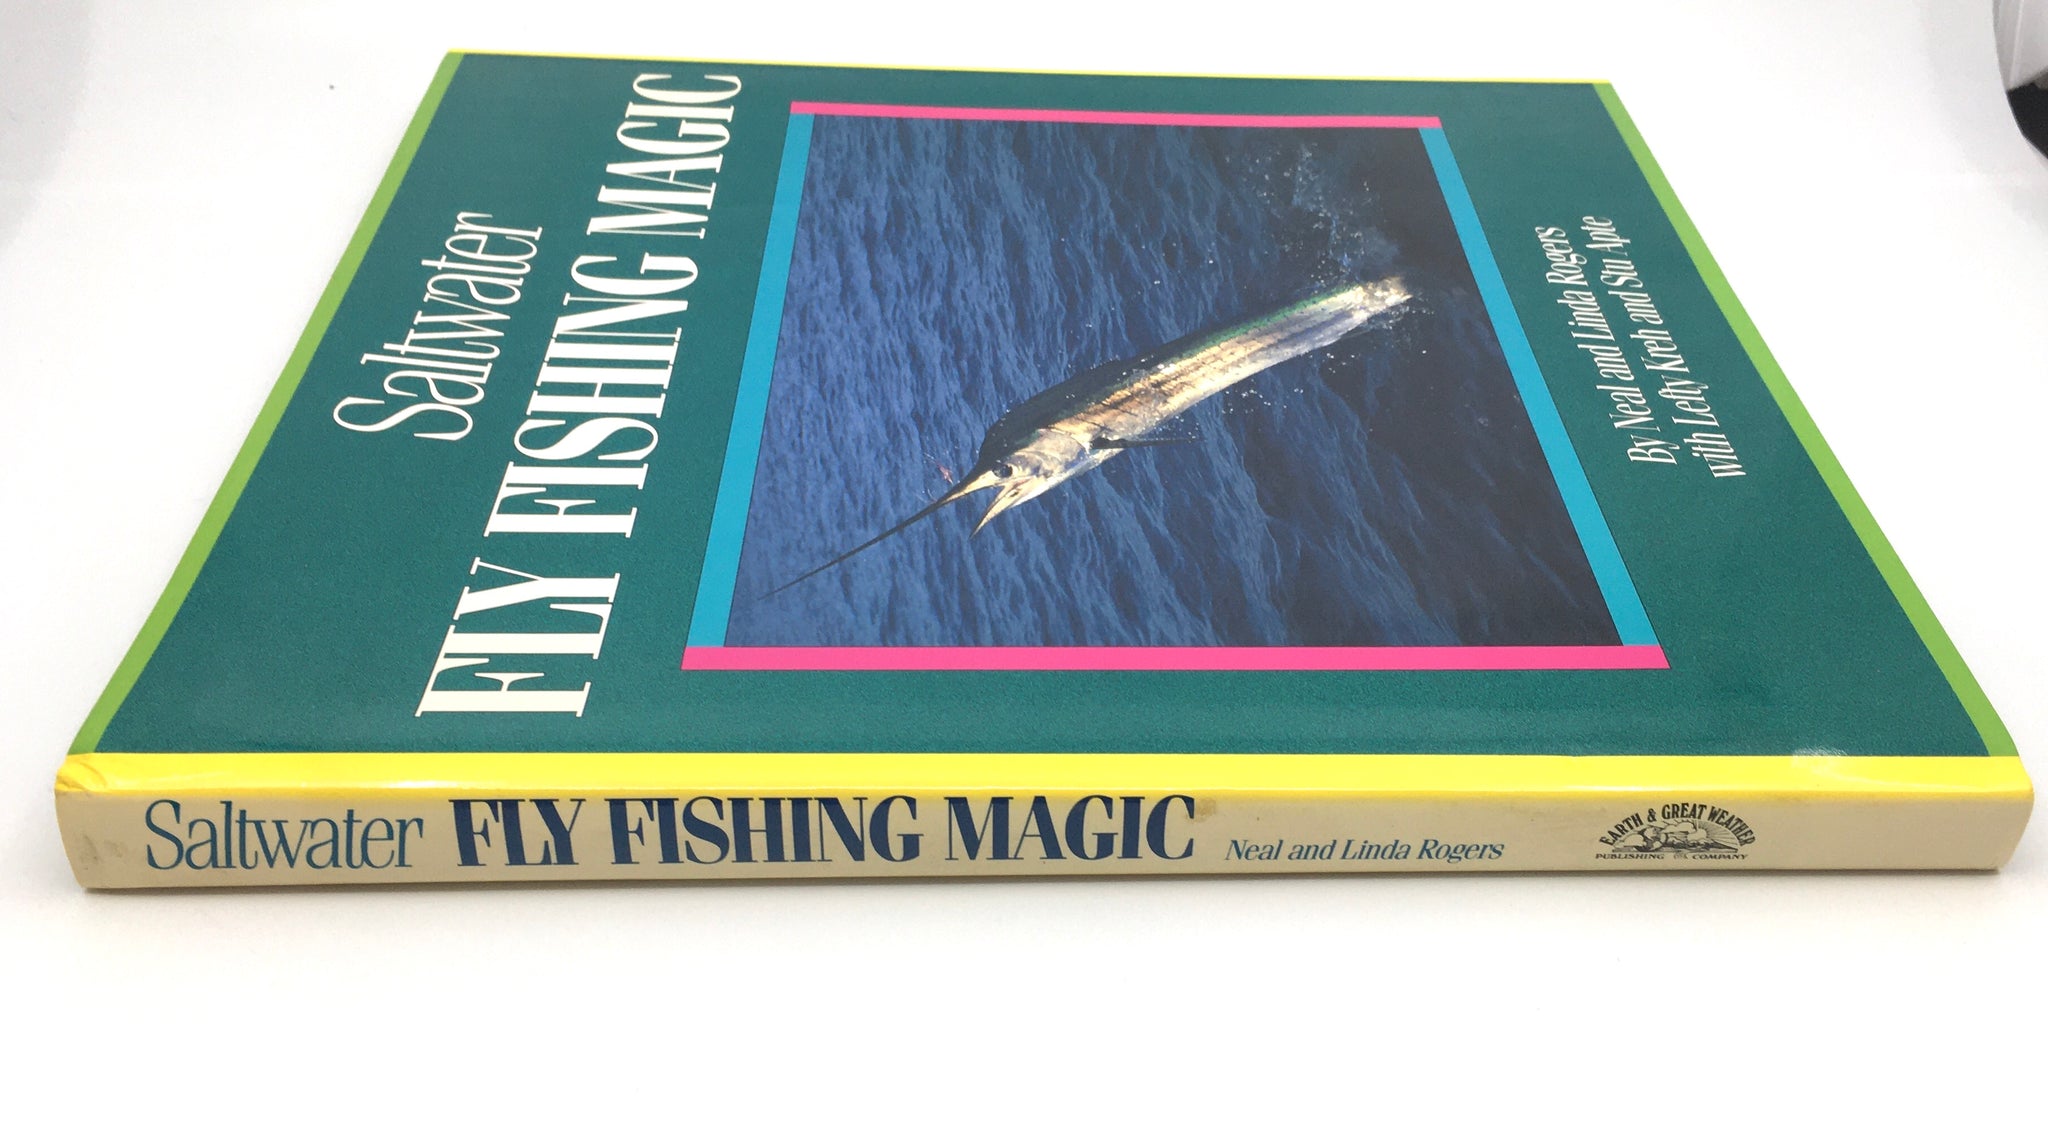 Saltwater Fly Fishing Magic - Supporting Freshwater Conservation